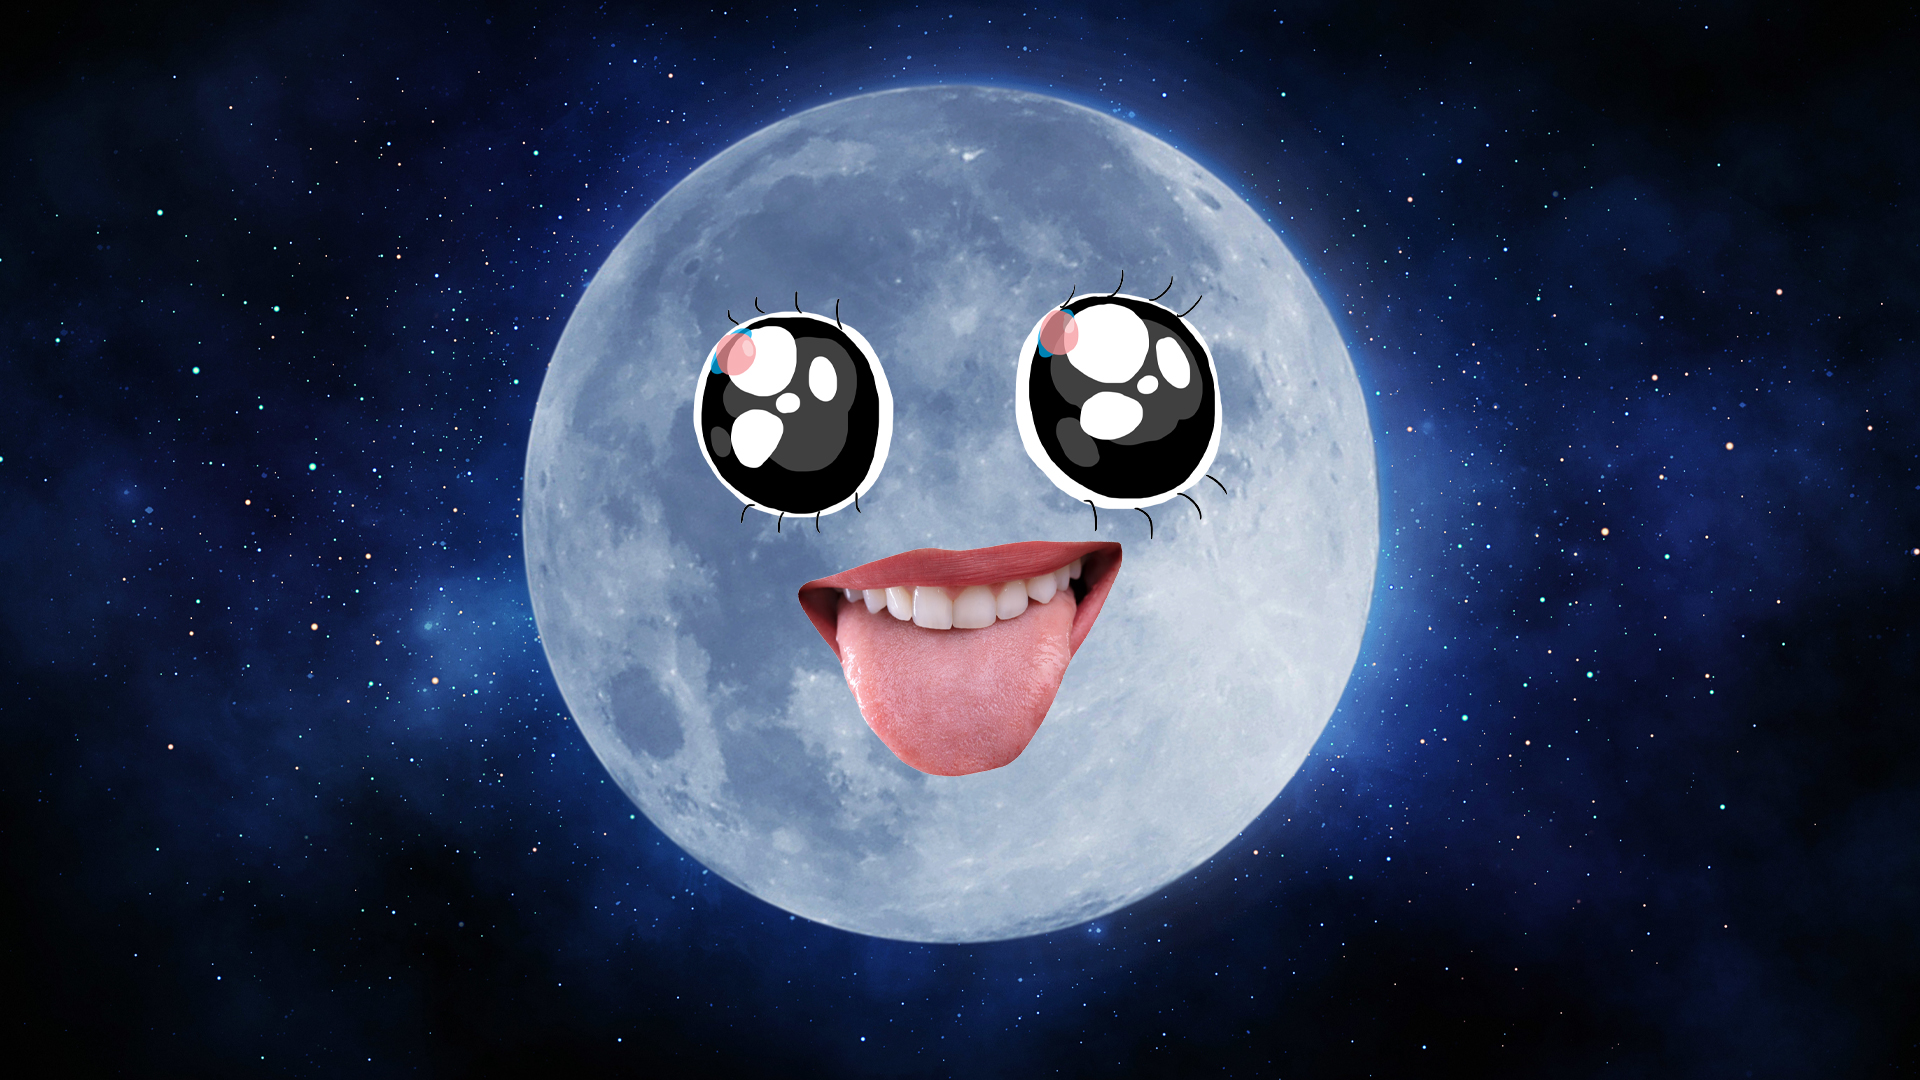 A full moon with a cheeky face